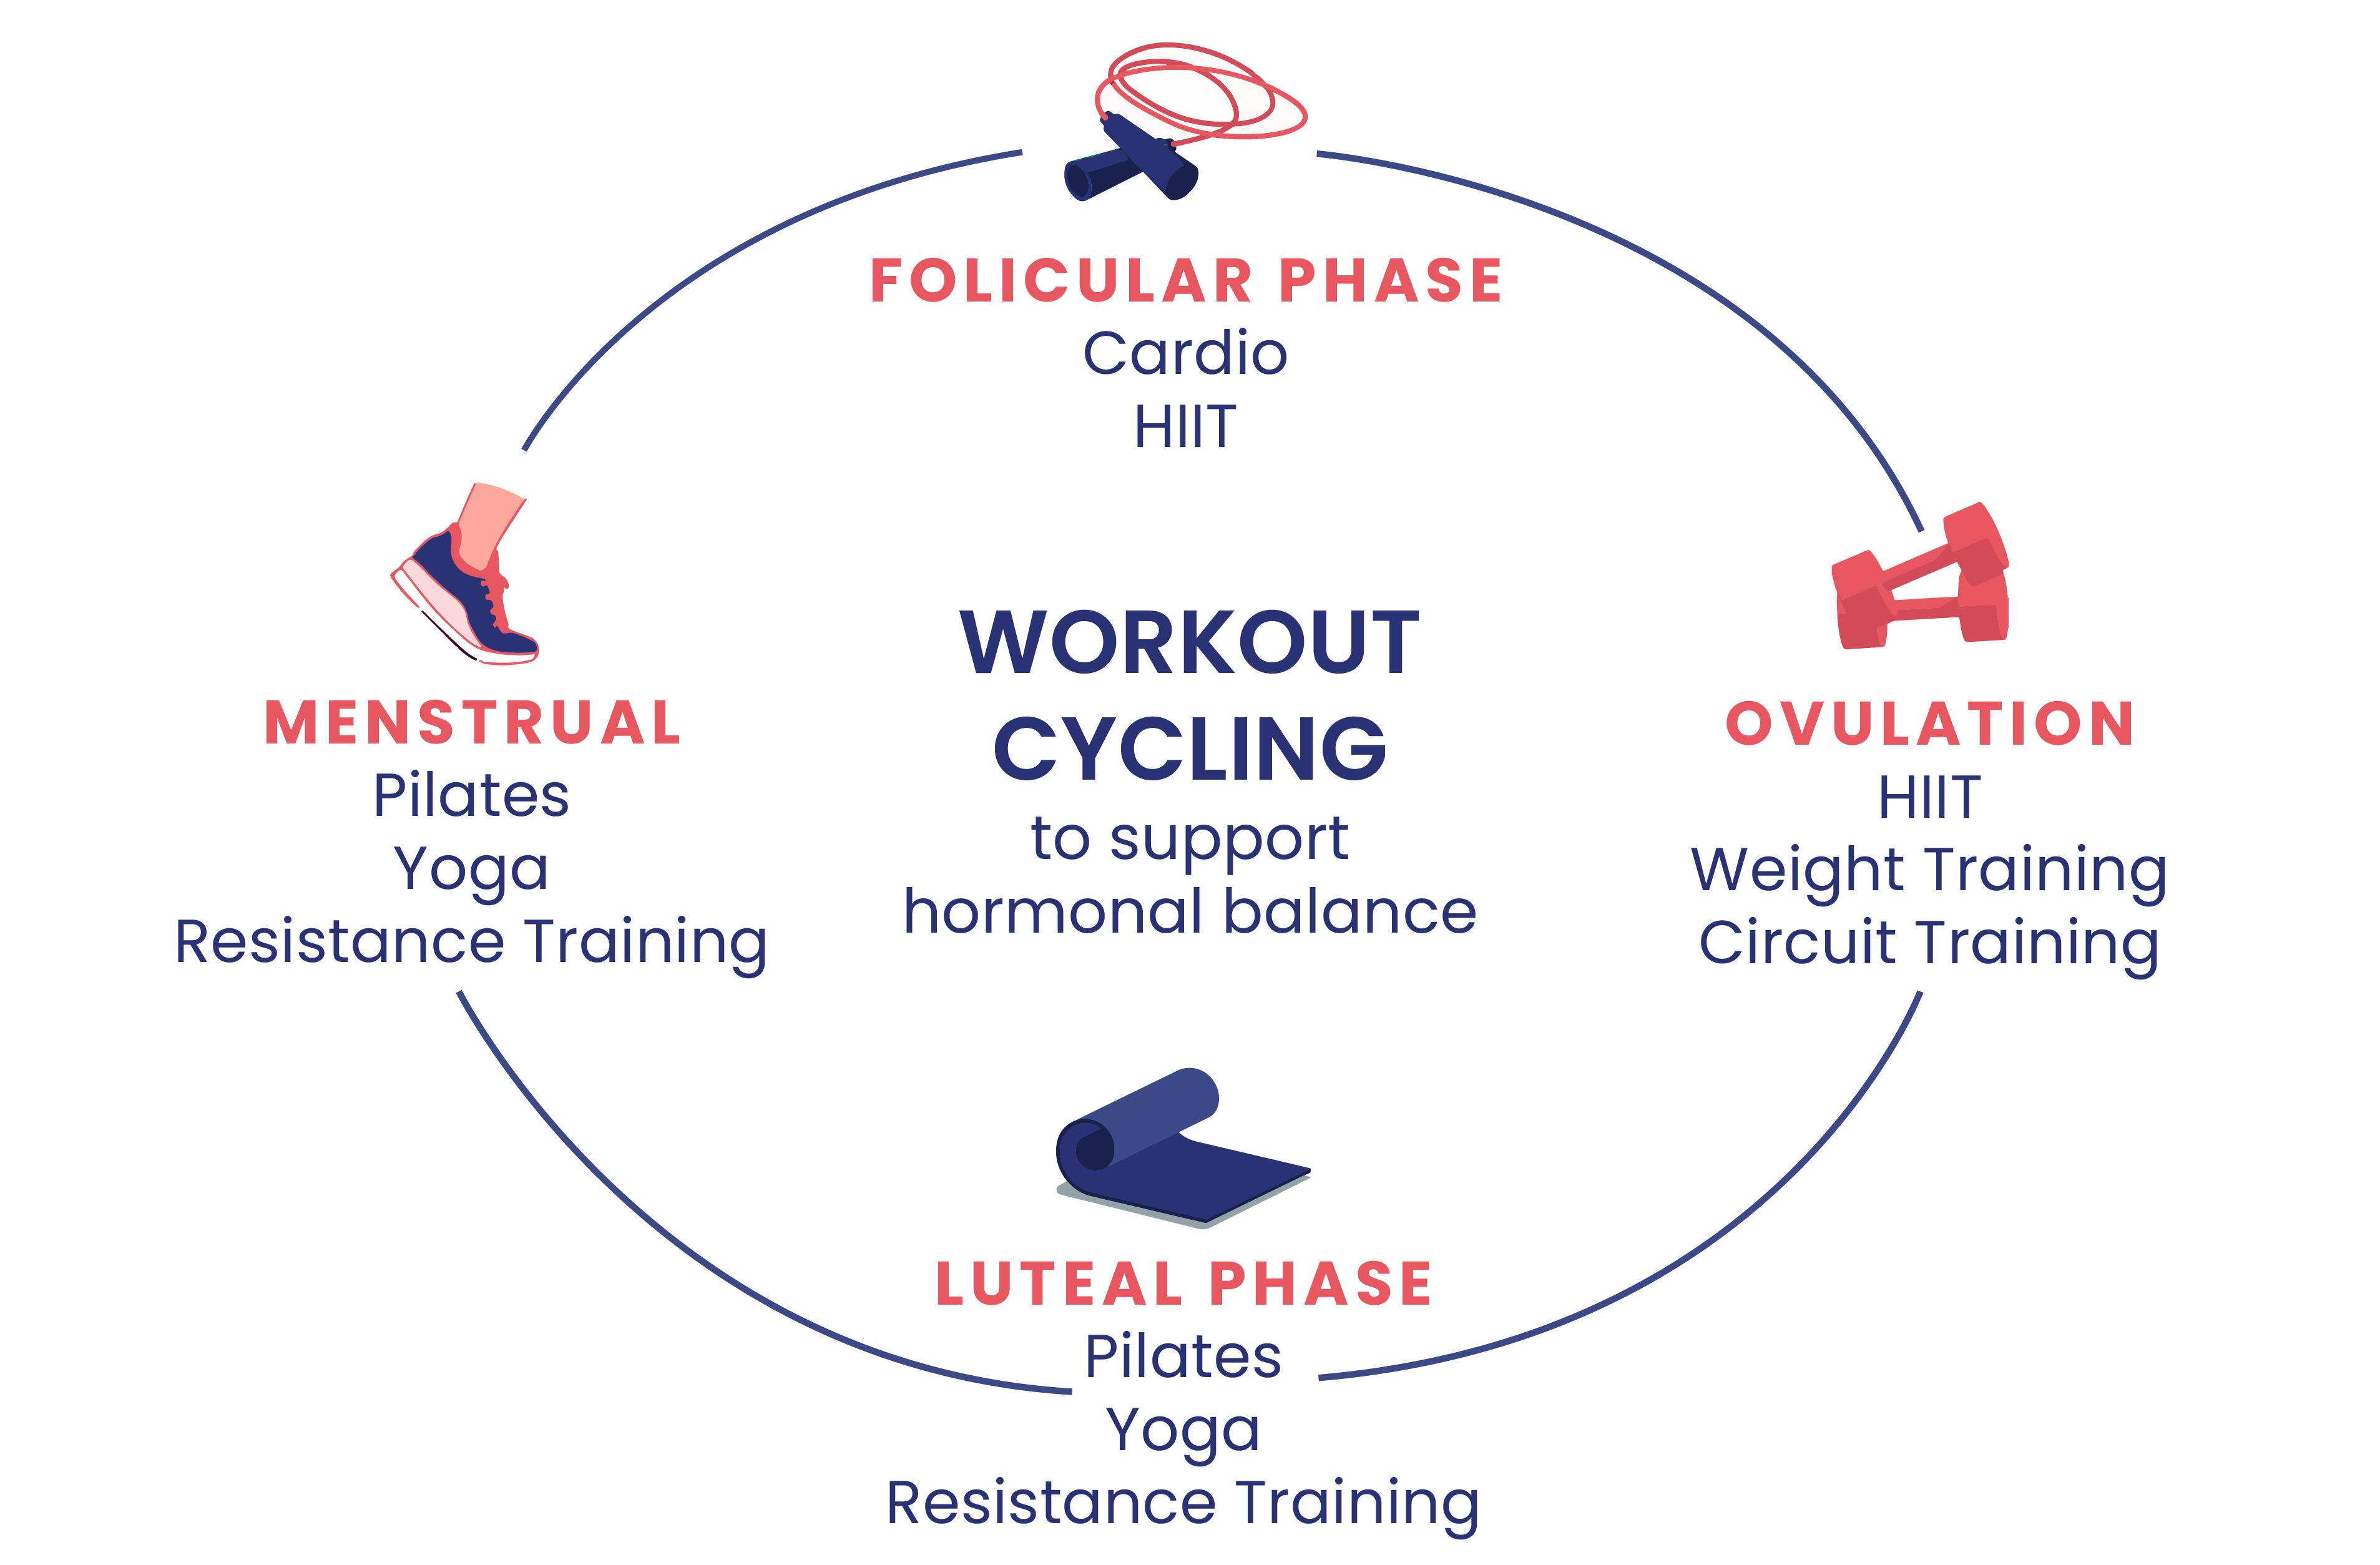 workouts as per your menstrual cycle - Cardio and HIIT during follicular phase. HIIT, Weight Training and Circuit Training during Ovulation. Pilates, Yoga and Resistance Training during the Luteal phase. Pilates, Yoga and Resistance Training during Menstrual Phase.